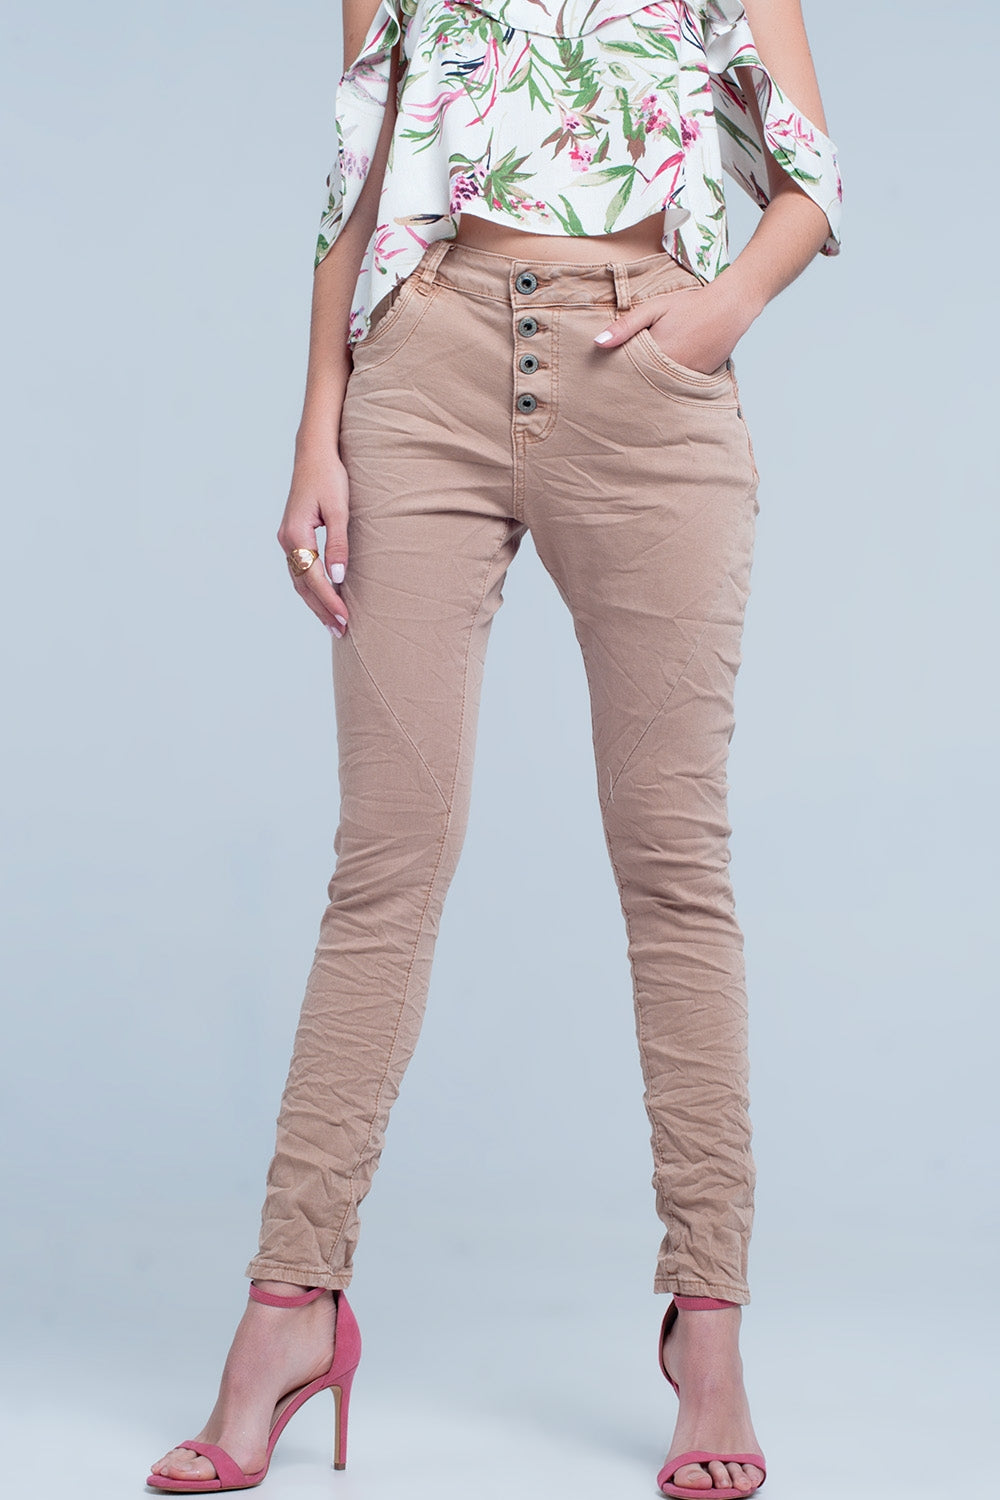 Q2-Brown crush jeans-Jeans